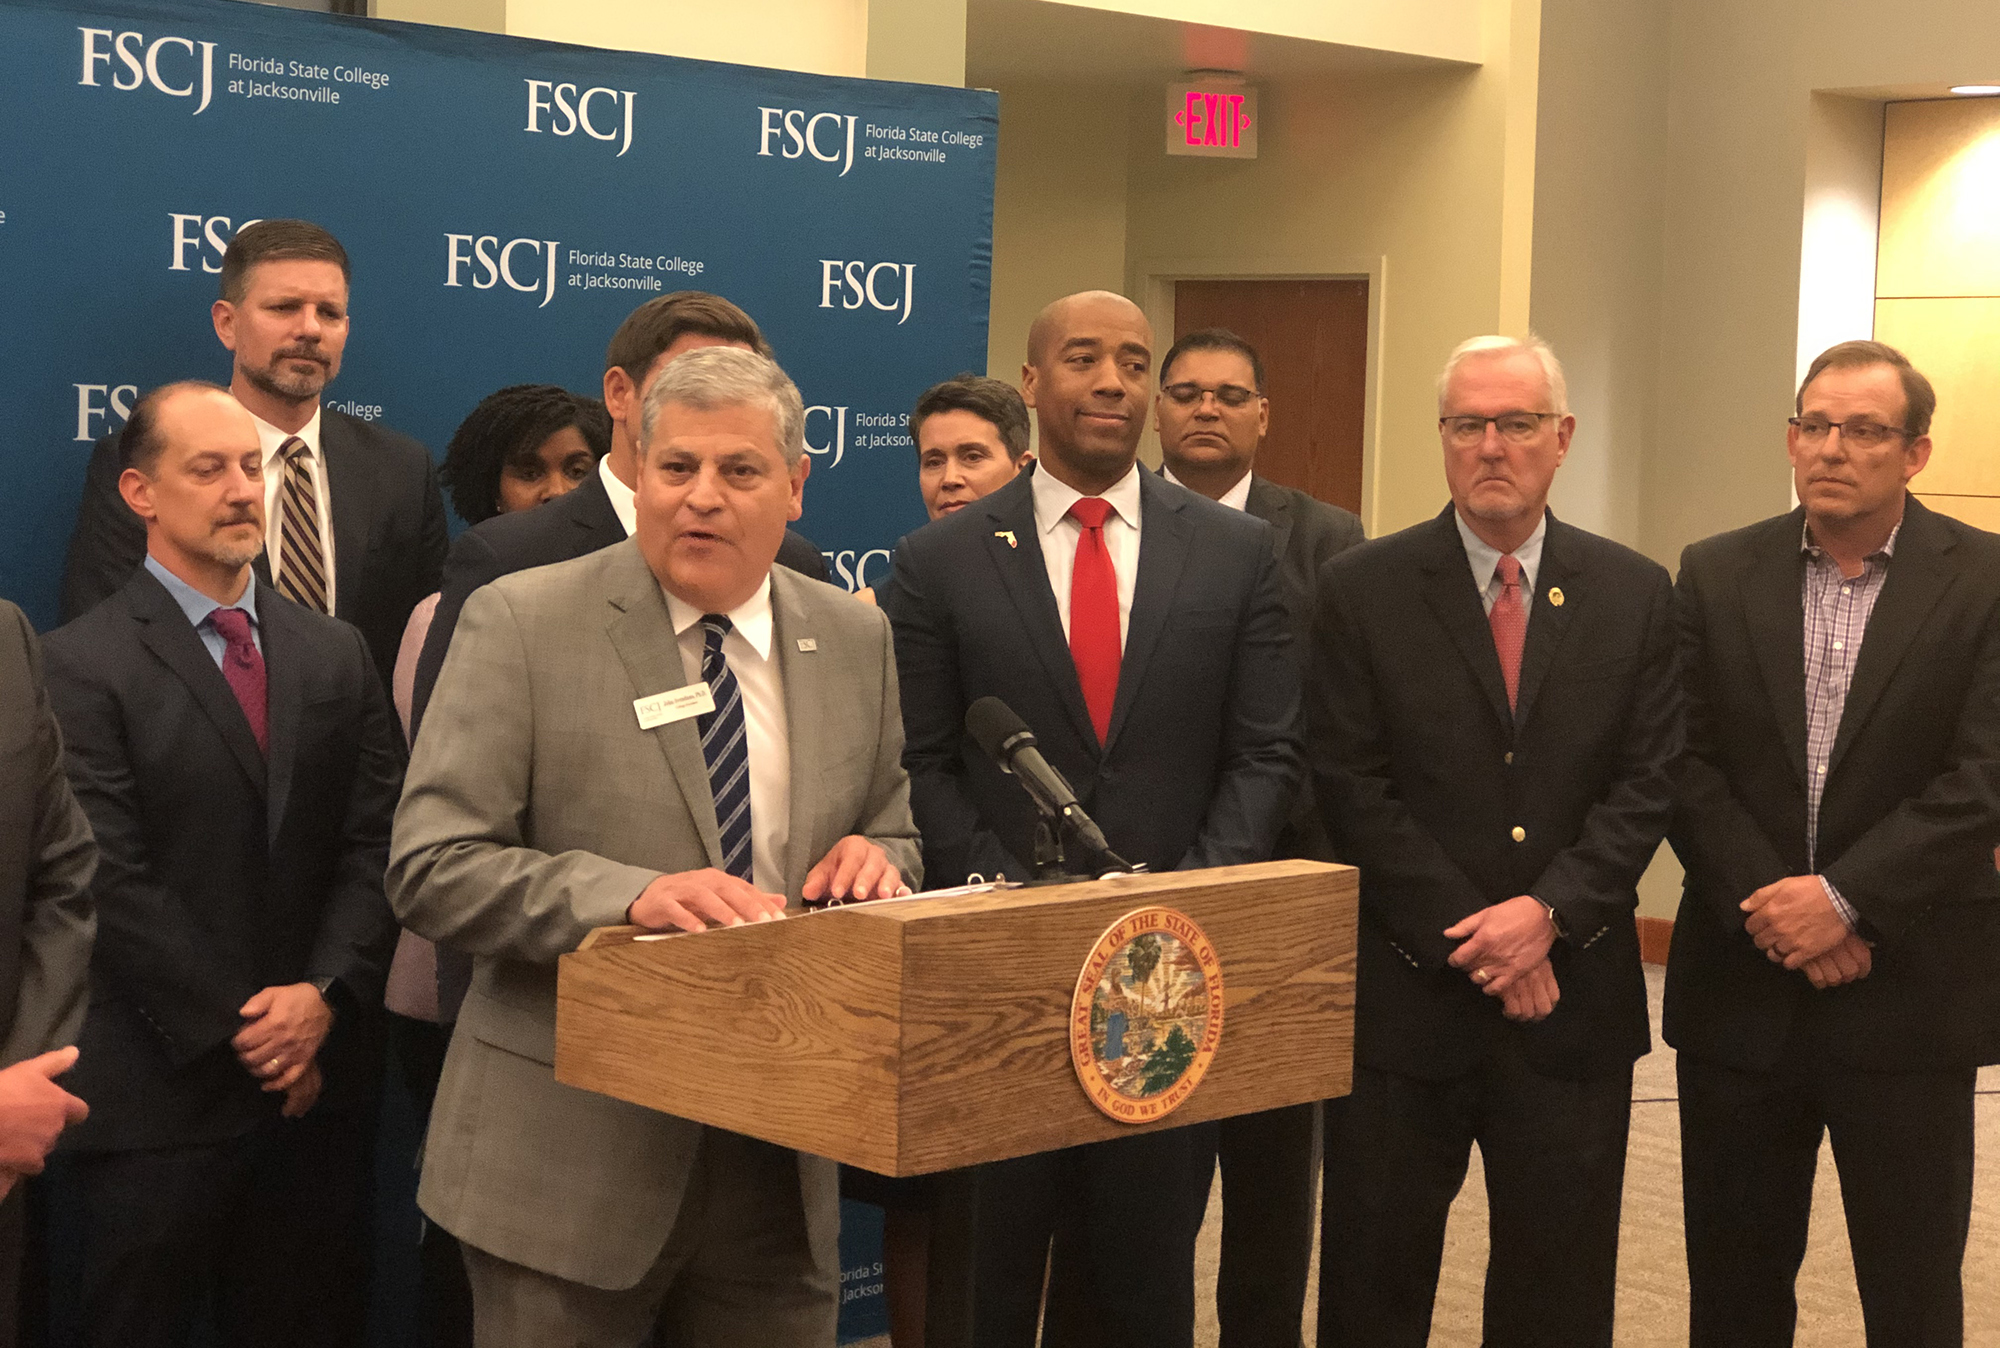 FSCJ President John Avendano said cybersecurity, software and software engineering are areas of expertise that Northeast Florida’s fintech workforce is lacking.